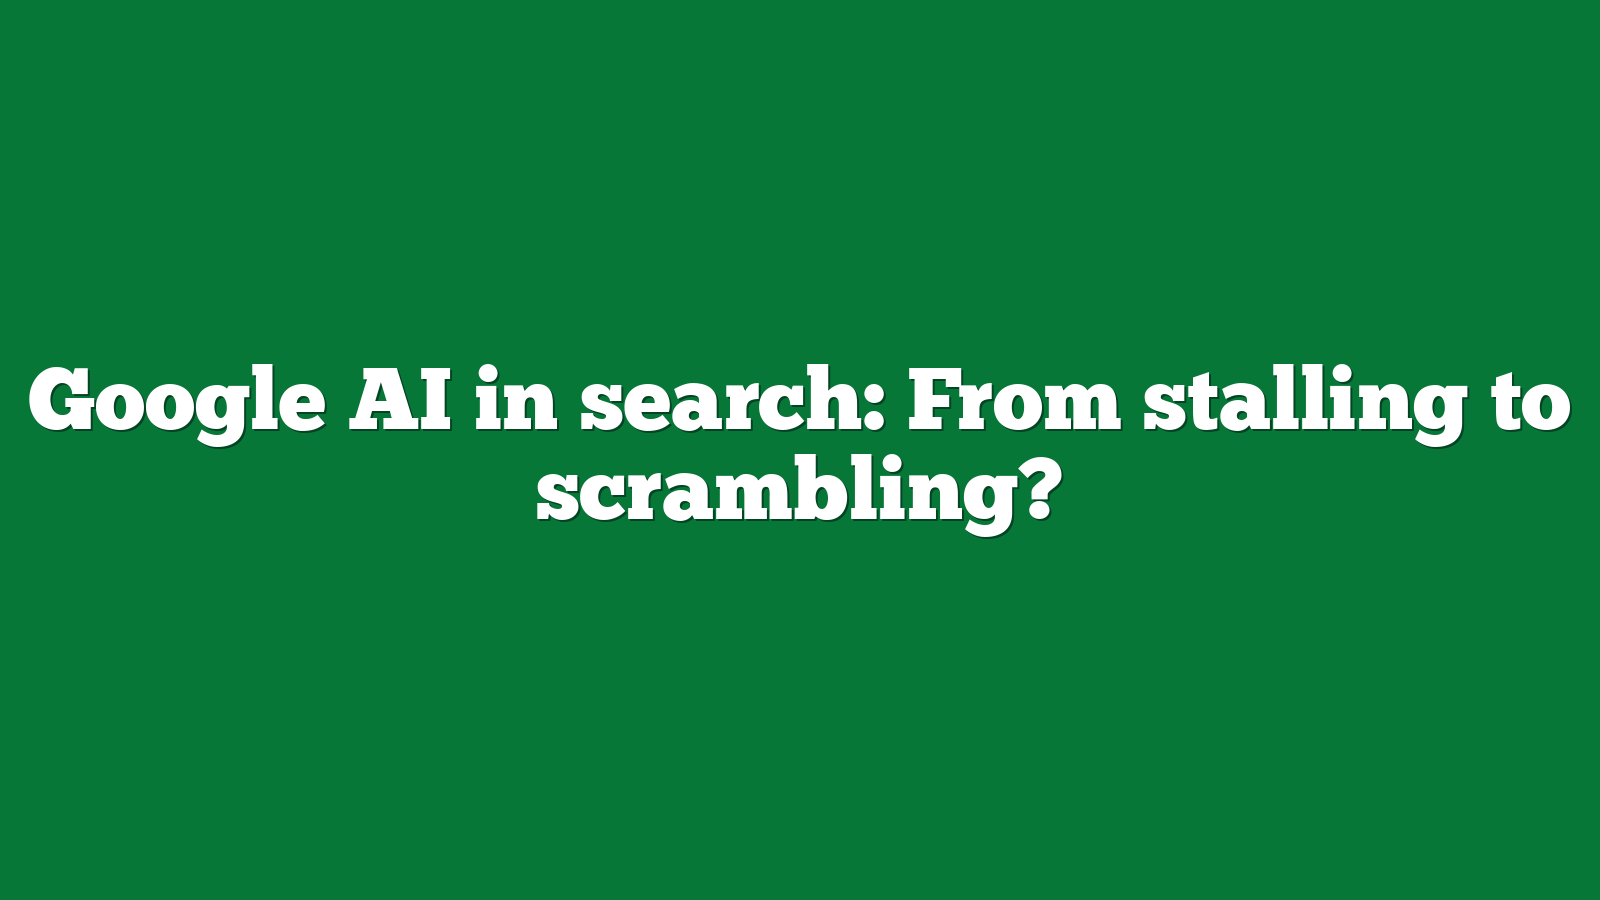 Google AI in search From stalling to scrambling